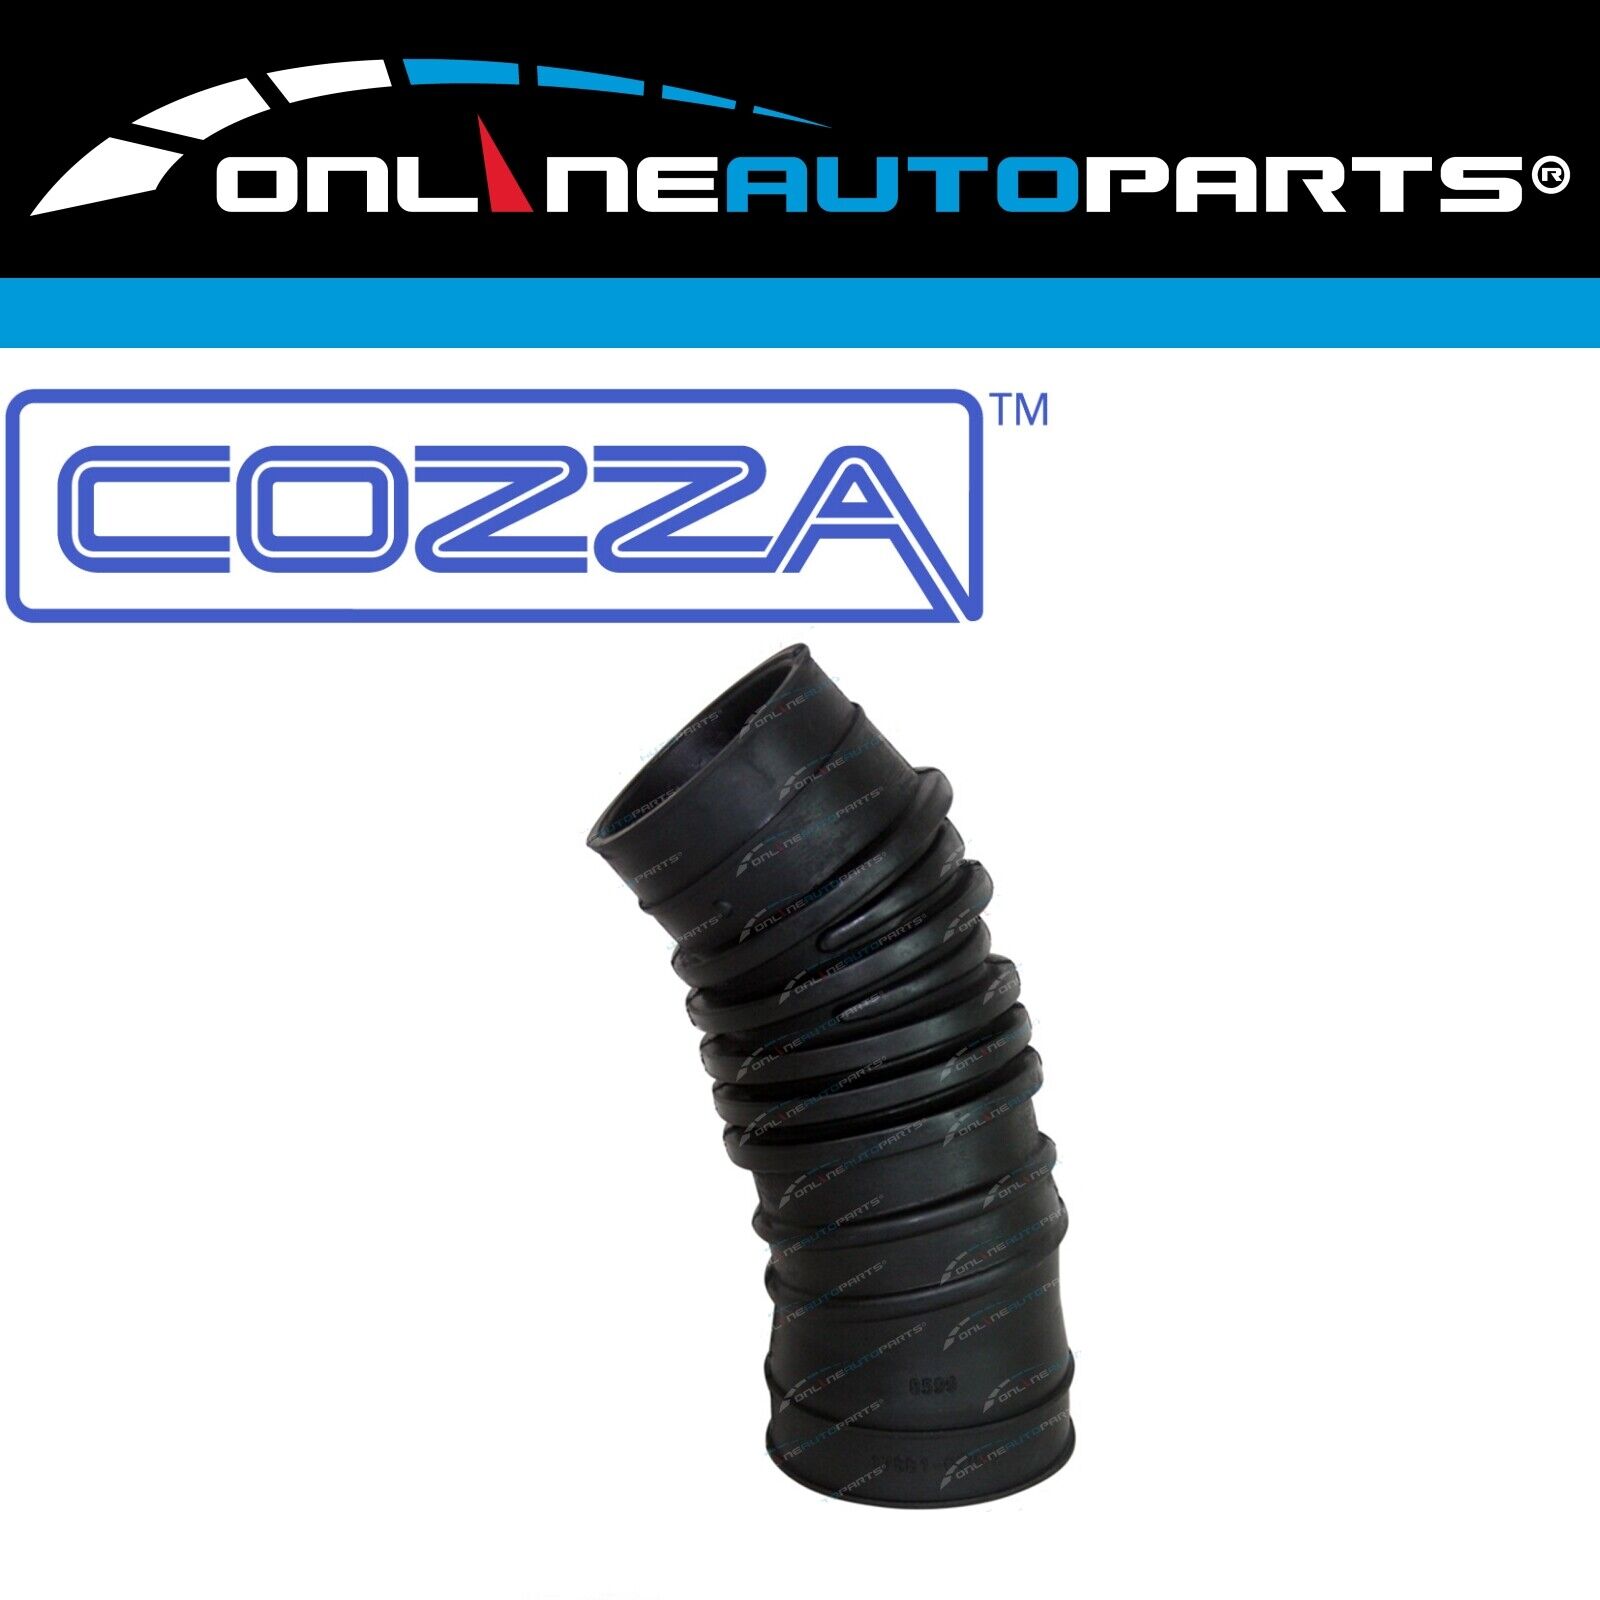 Air Cleaner Intake Hose for Toyota Hilux Surf KZN185 1KZ-TE Diesel 4wd Wagon